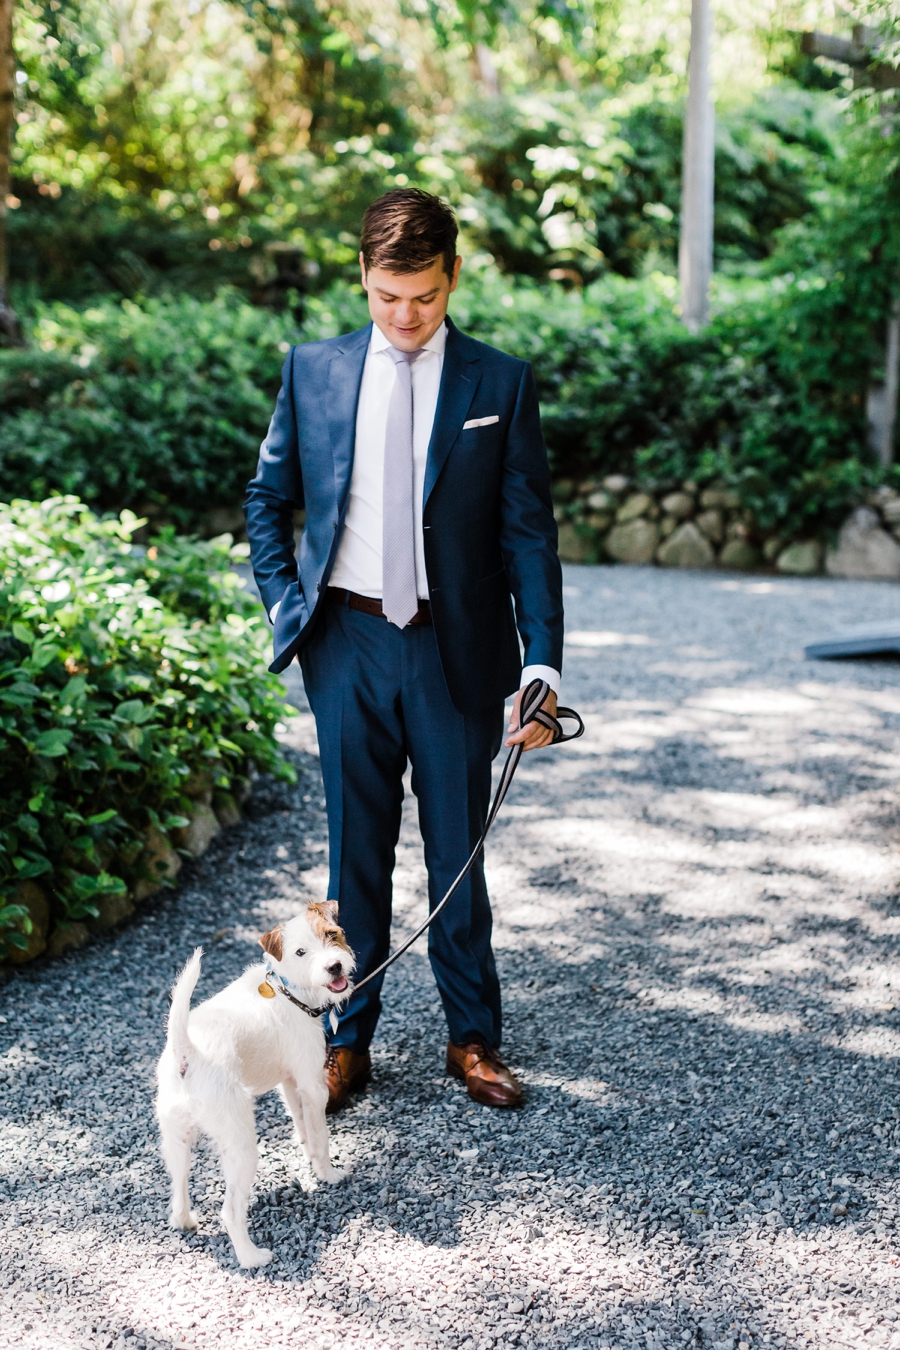 Groom with his dog on his wedding day